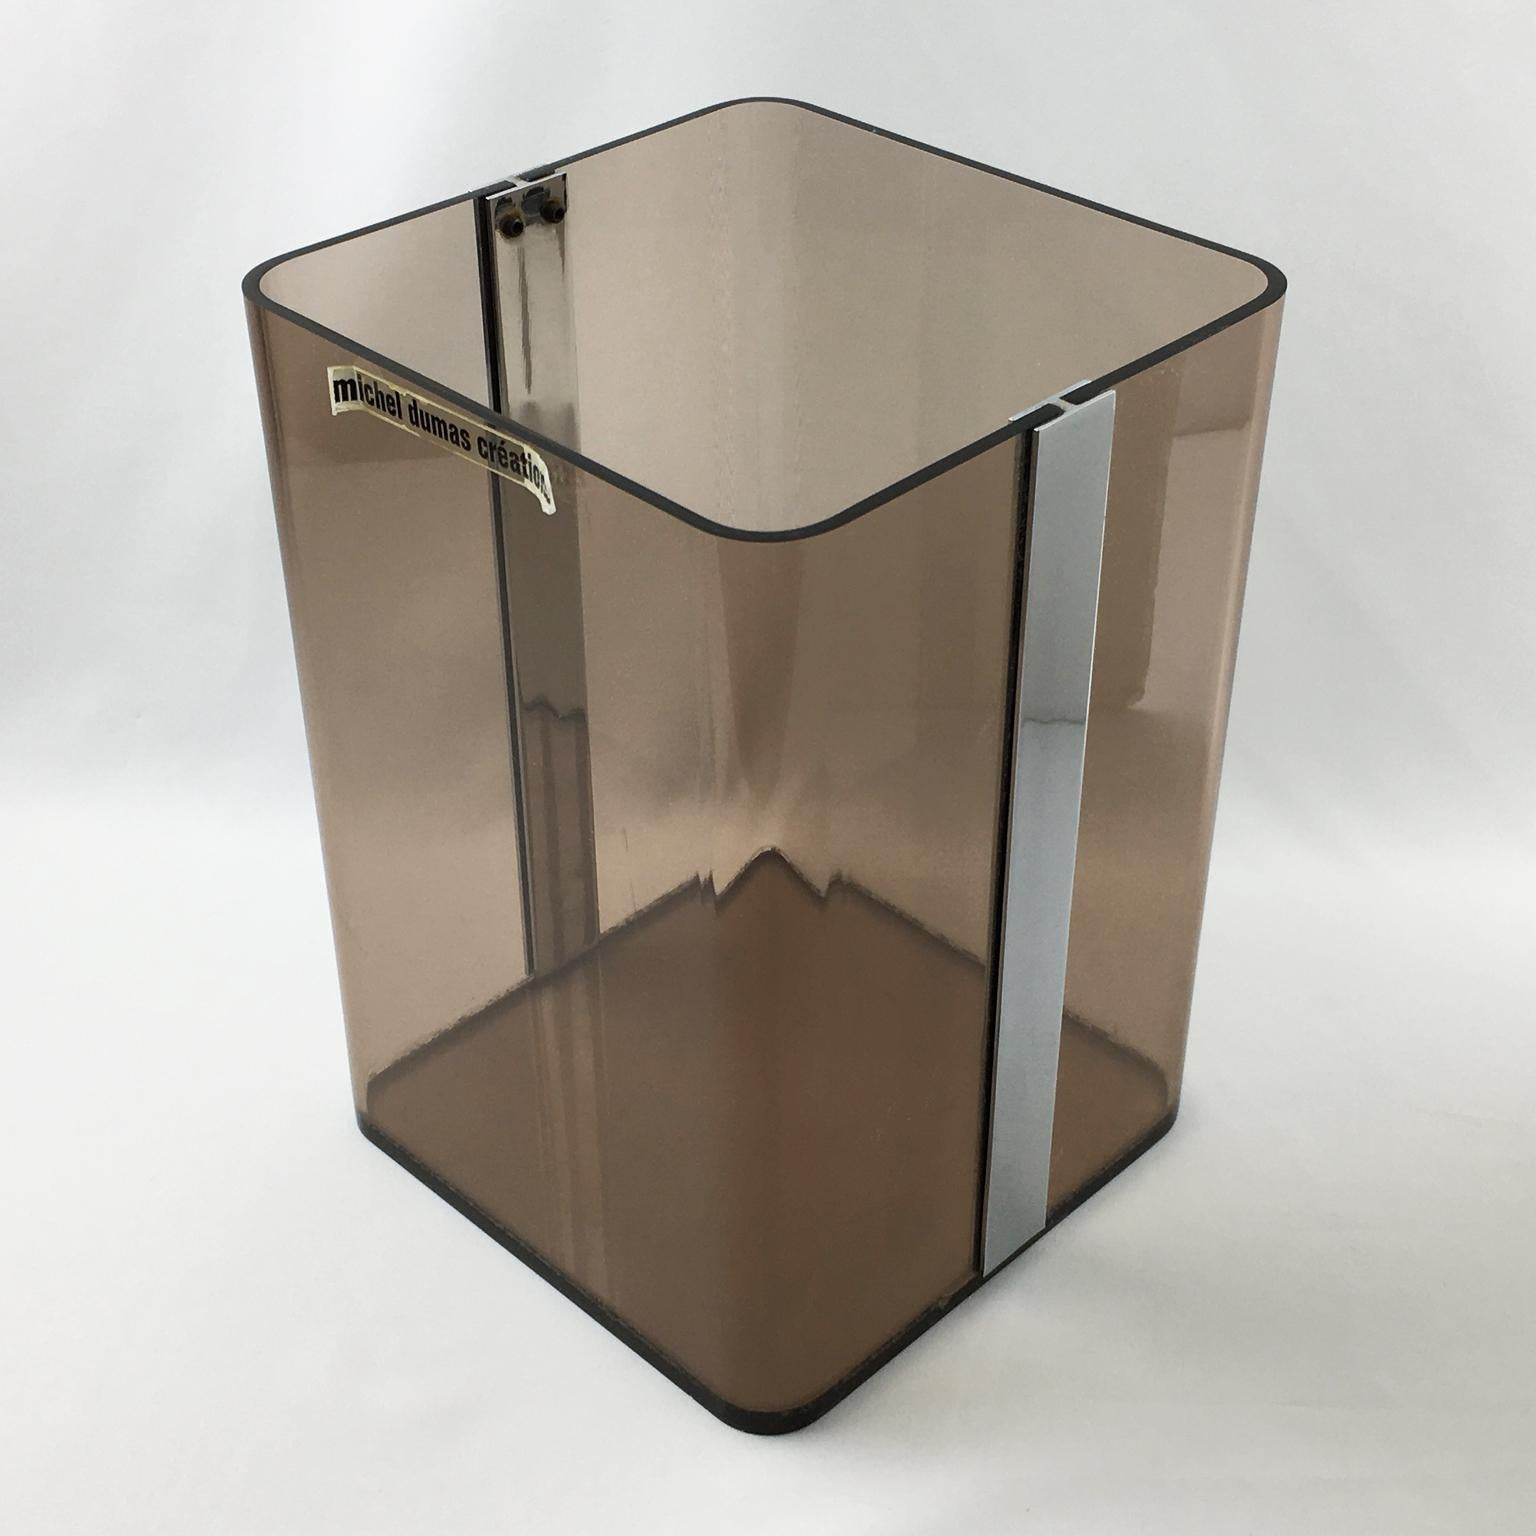 Elegant Lucite paper waste basket designed for Roche Bobois by Michel Dumas Creations in 1970s. Geometric tall shape with chrome accent and transparent gray smoke Lucite. Great accessory for any modern interior, office or bathroom. Still has its